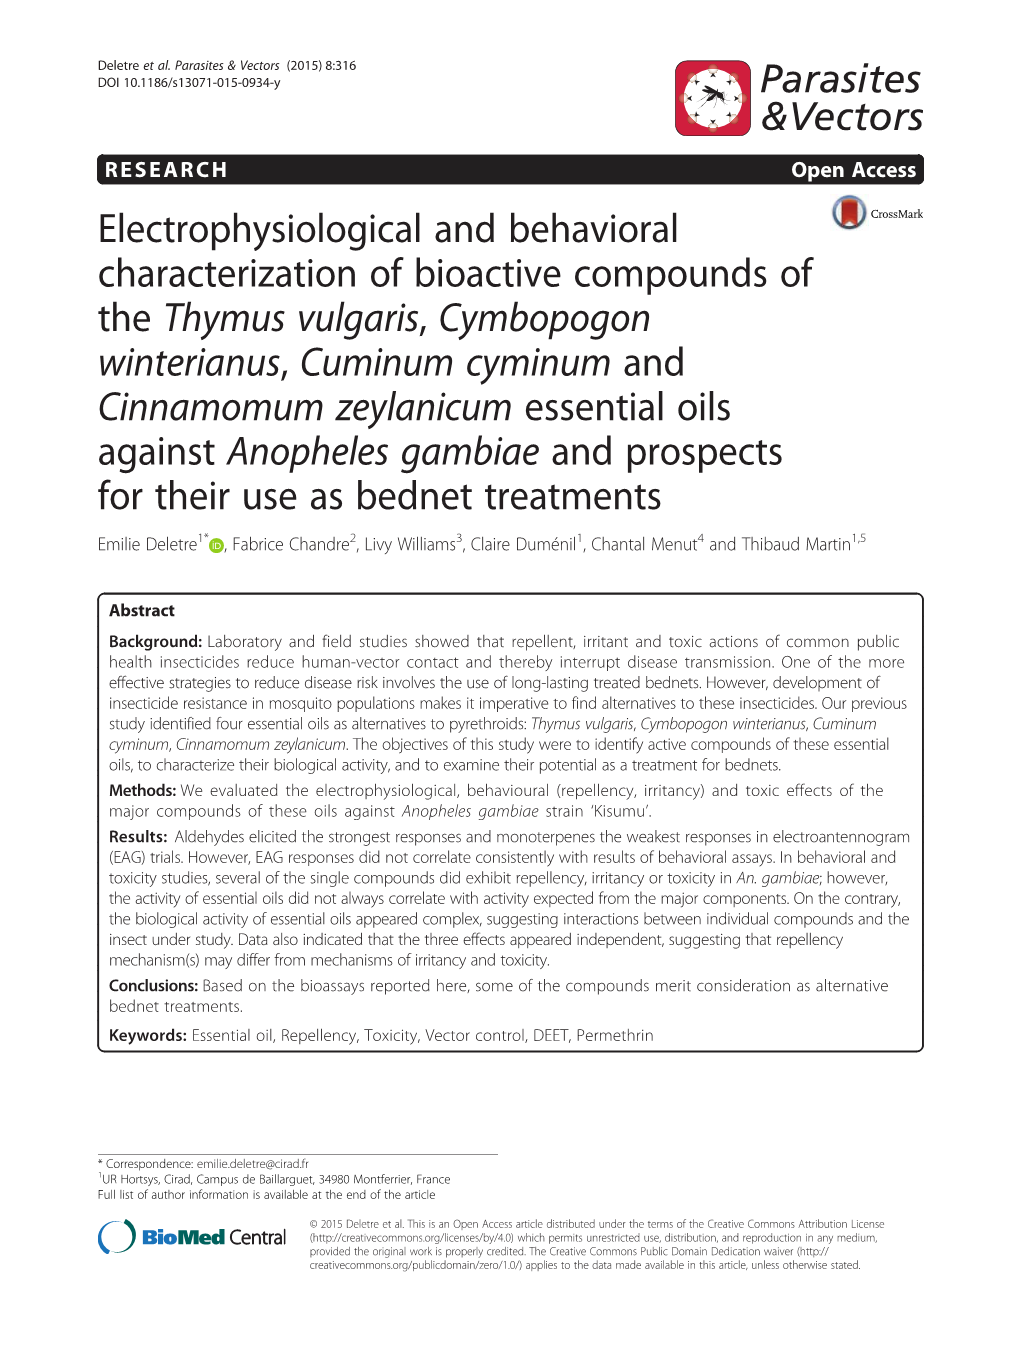 Electrophysiological and Behavioral Characterization Of